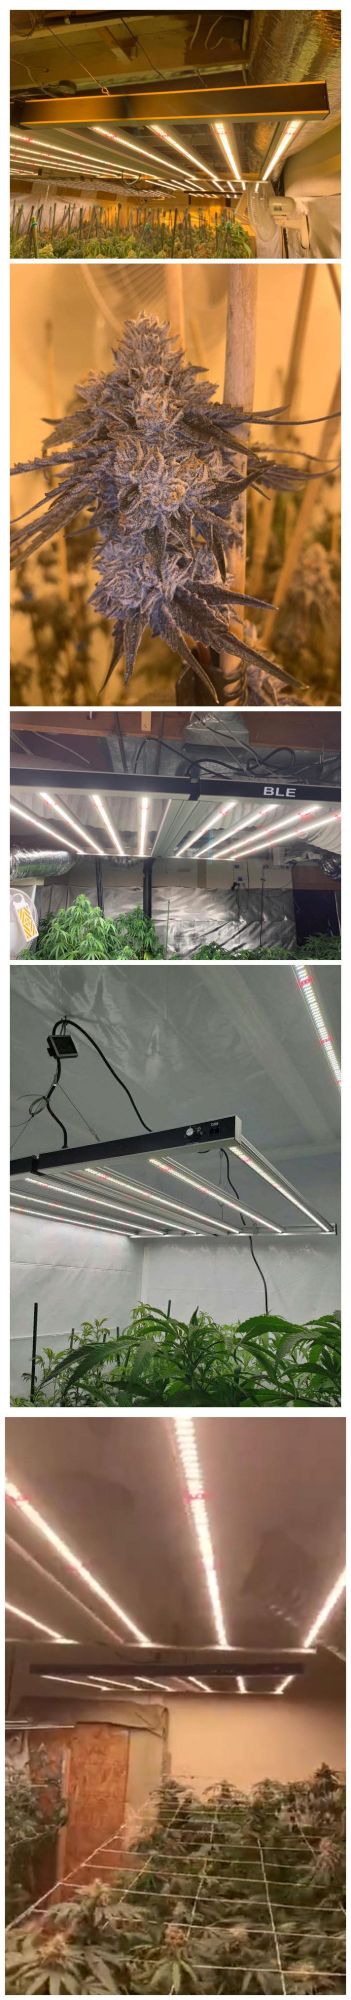 Wholesale LED Growing Lights 880W for Industry Growth Best LED Grow Lights